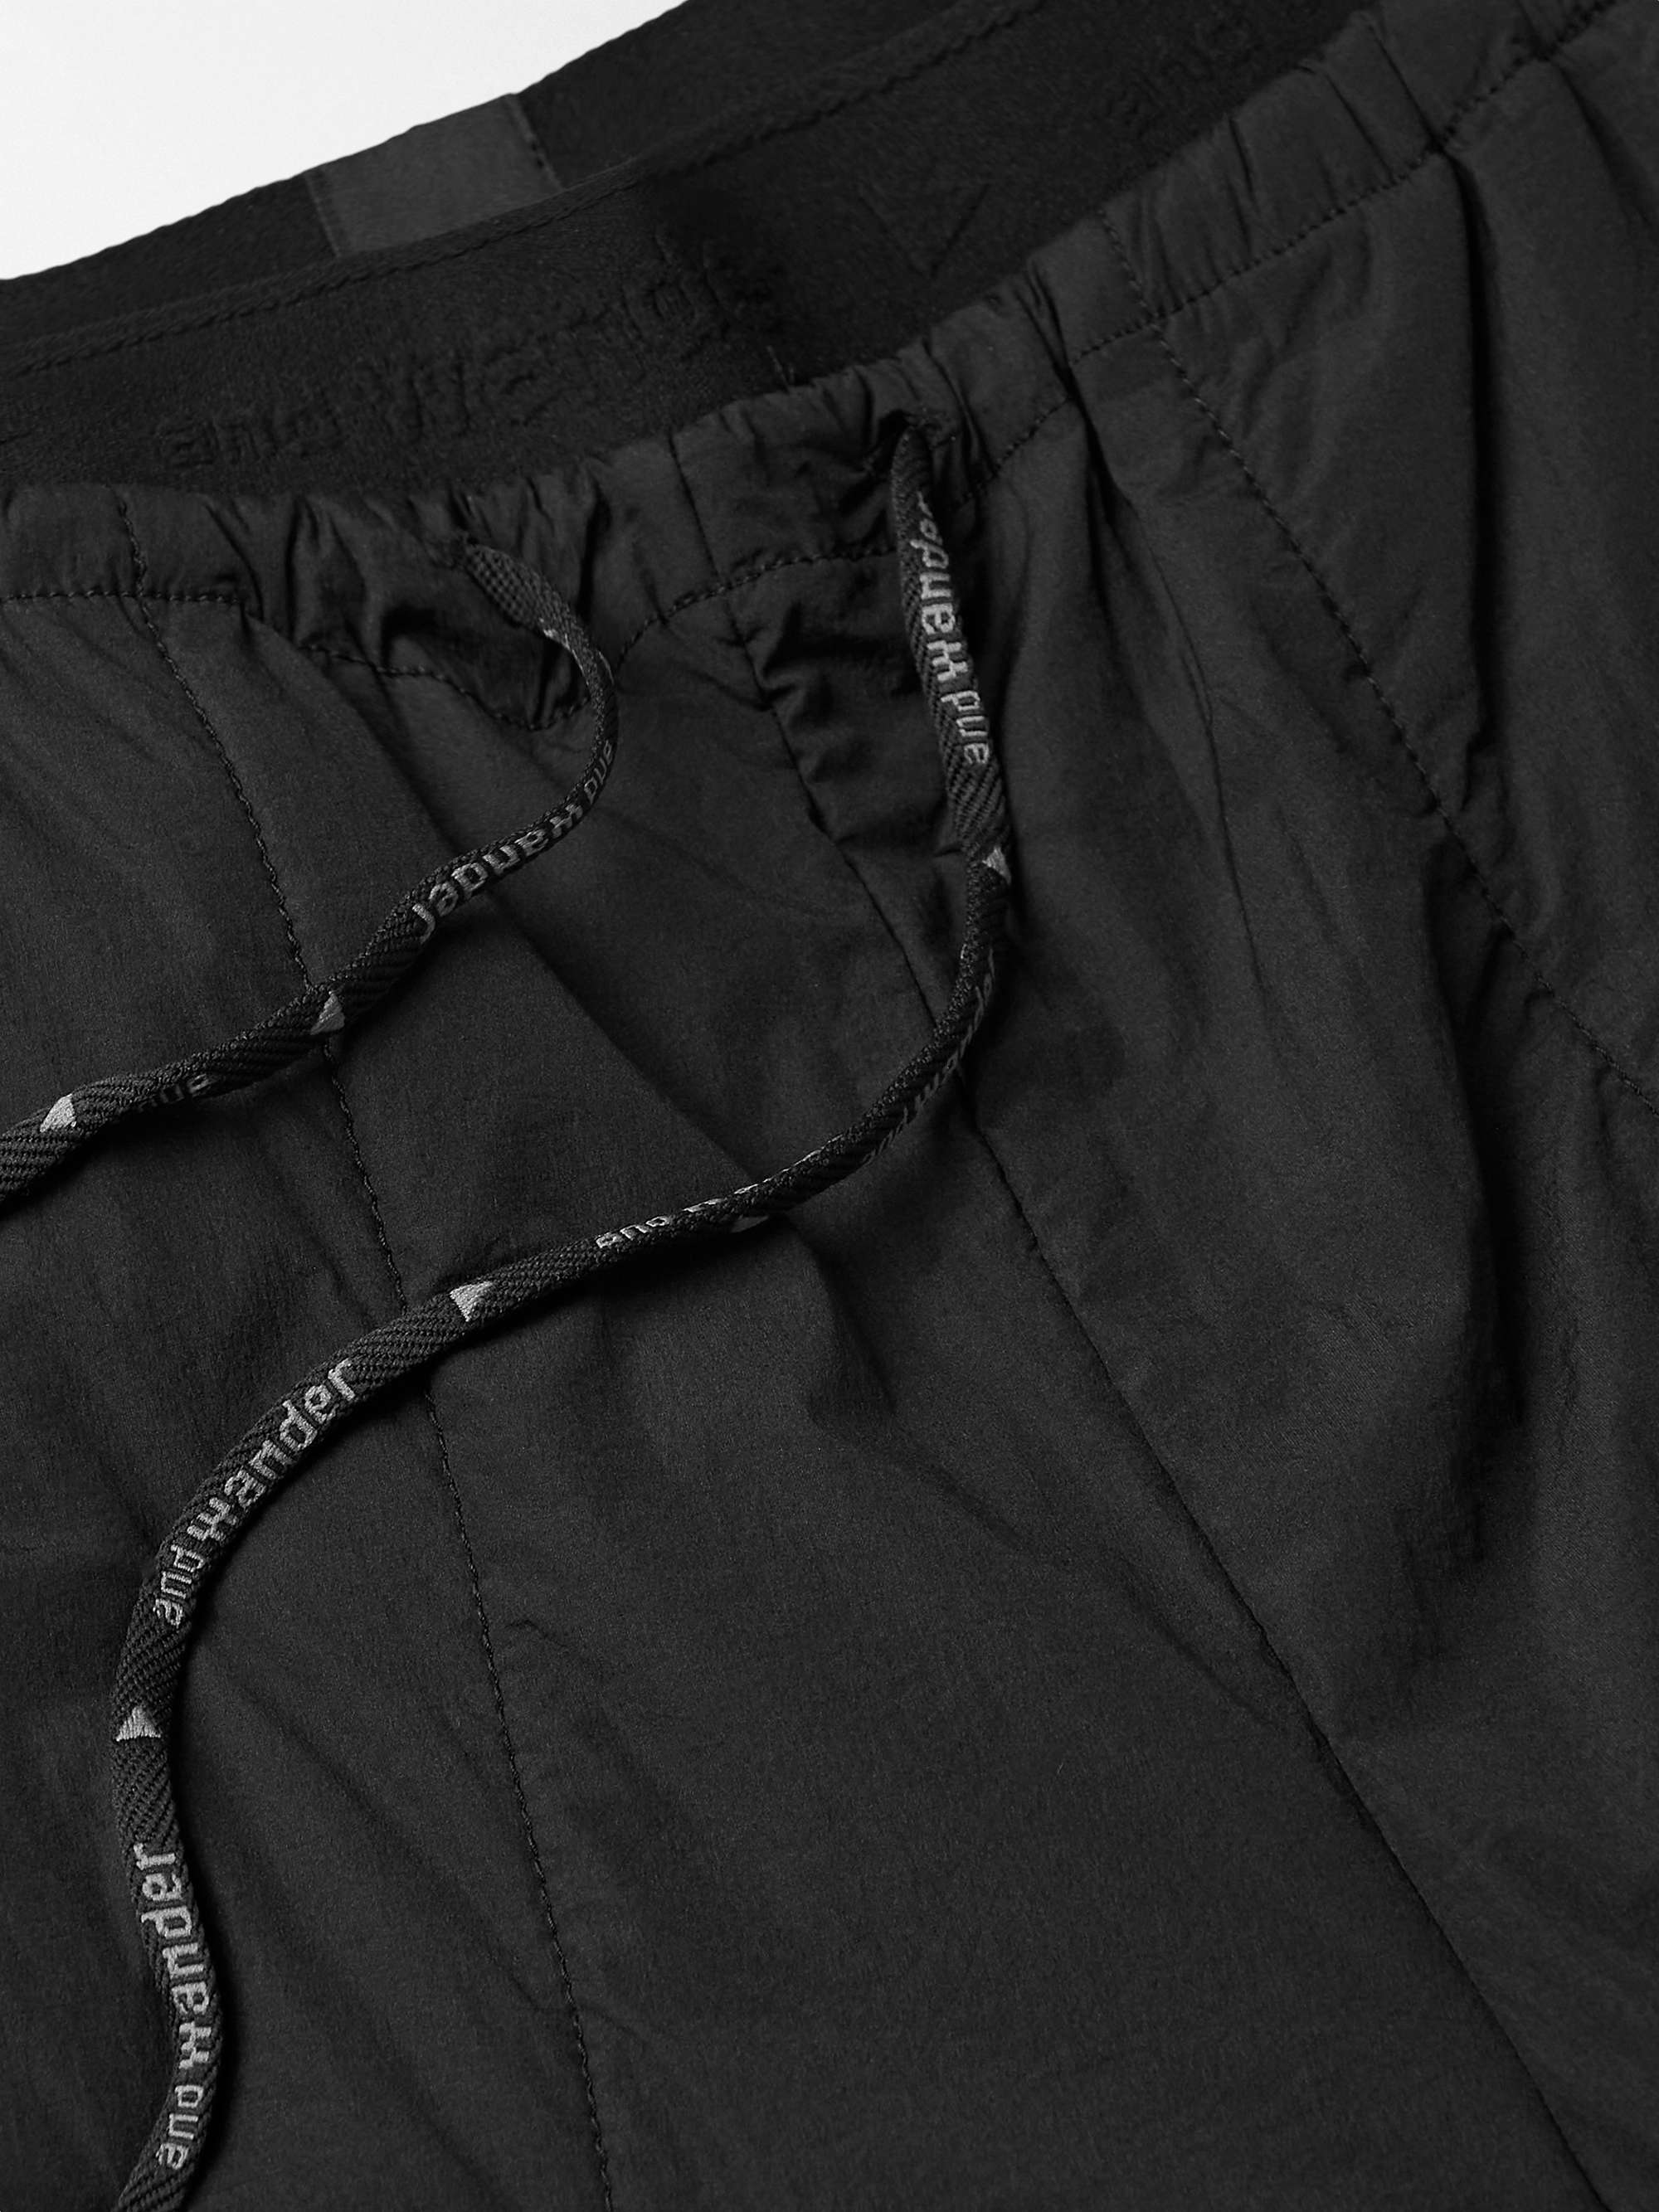 AND WANDER Alpha Direct Tapered CORDURA and Polartec Fleece Drawstring Trousers